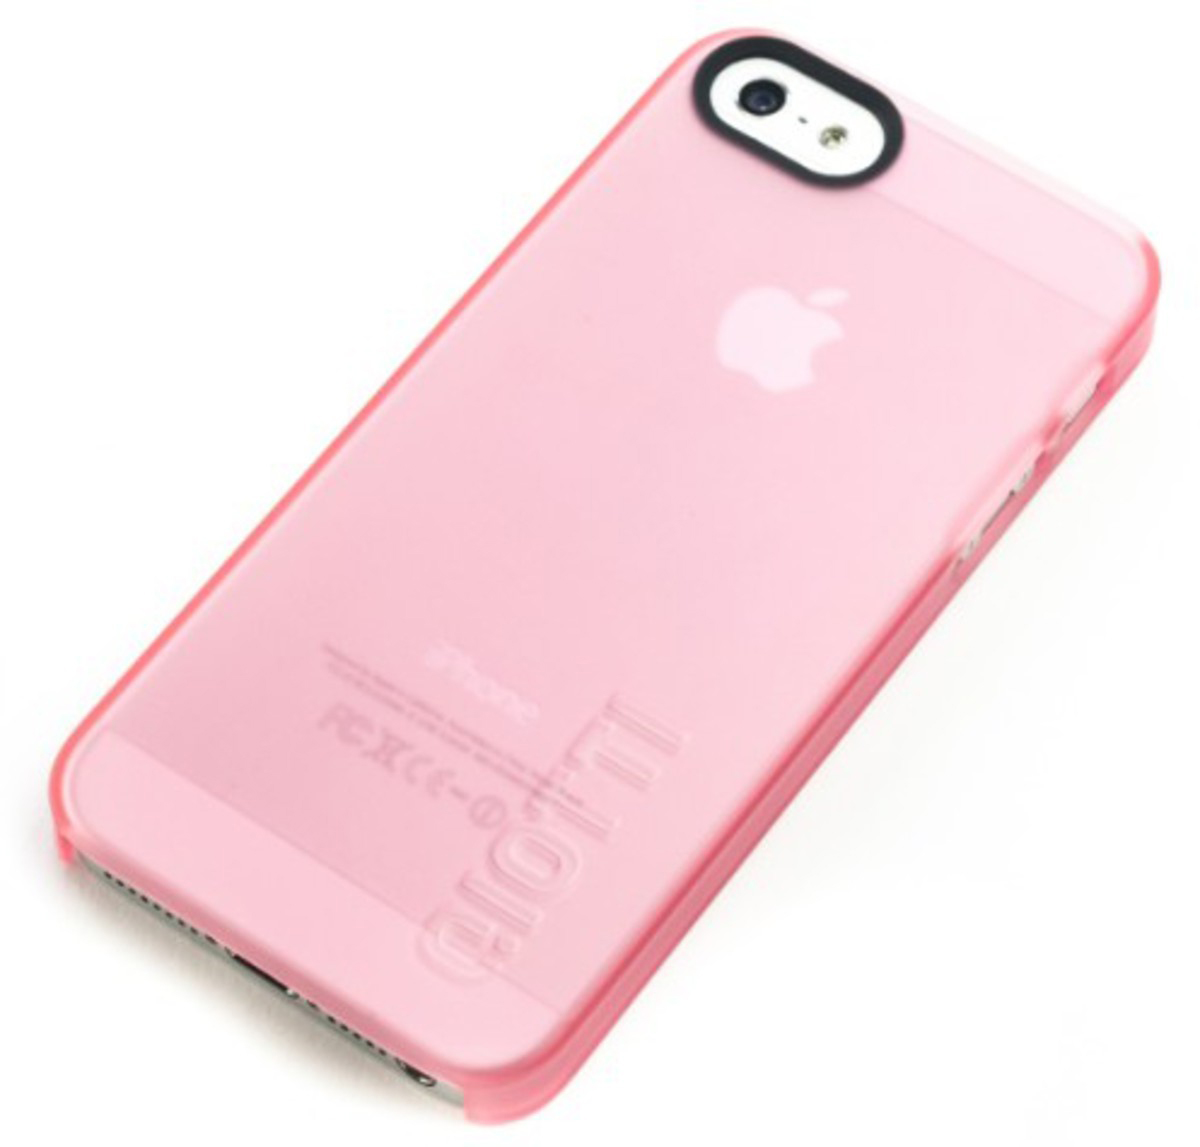 iPhone iPhone Q1002123 5, 5s, Cover, Curves QIOTTI Apple, Rosa Frozen